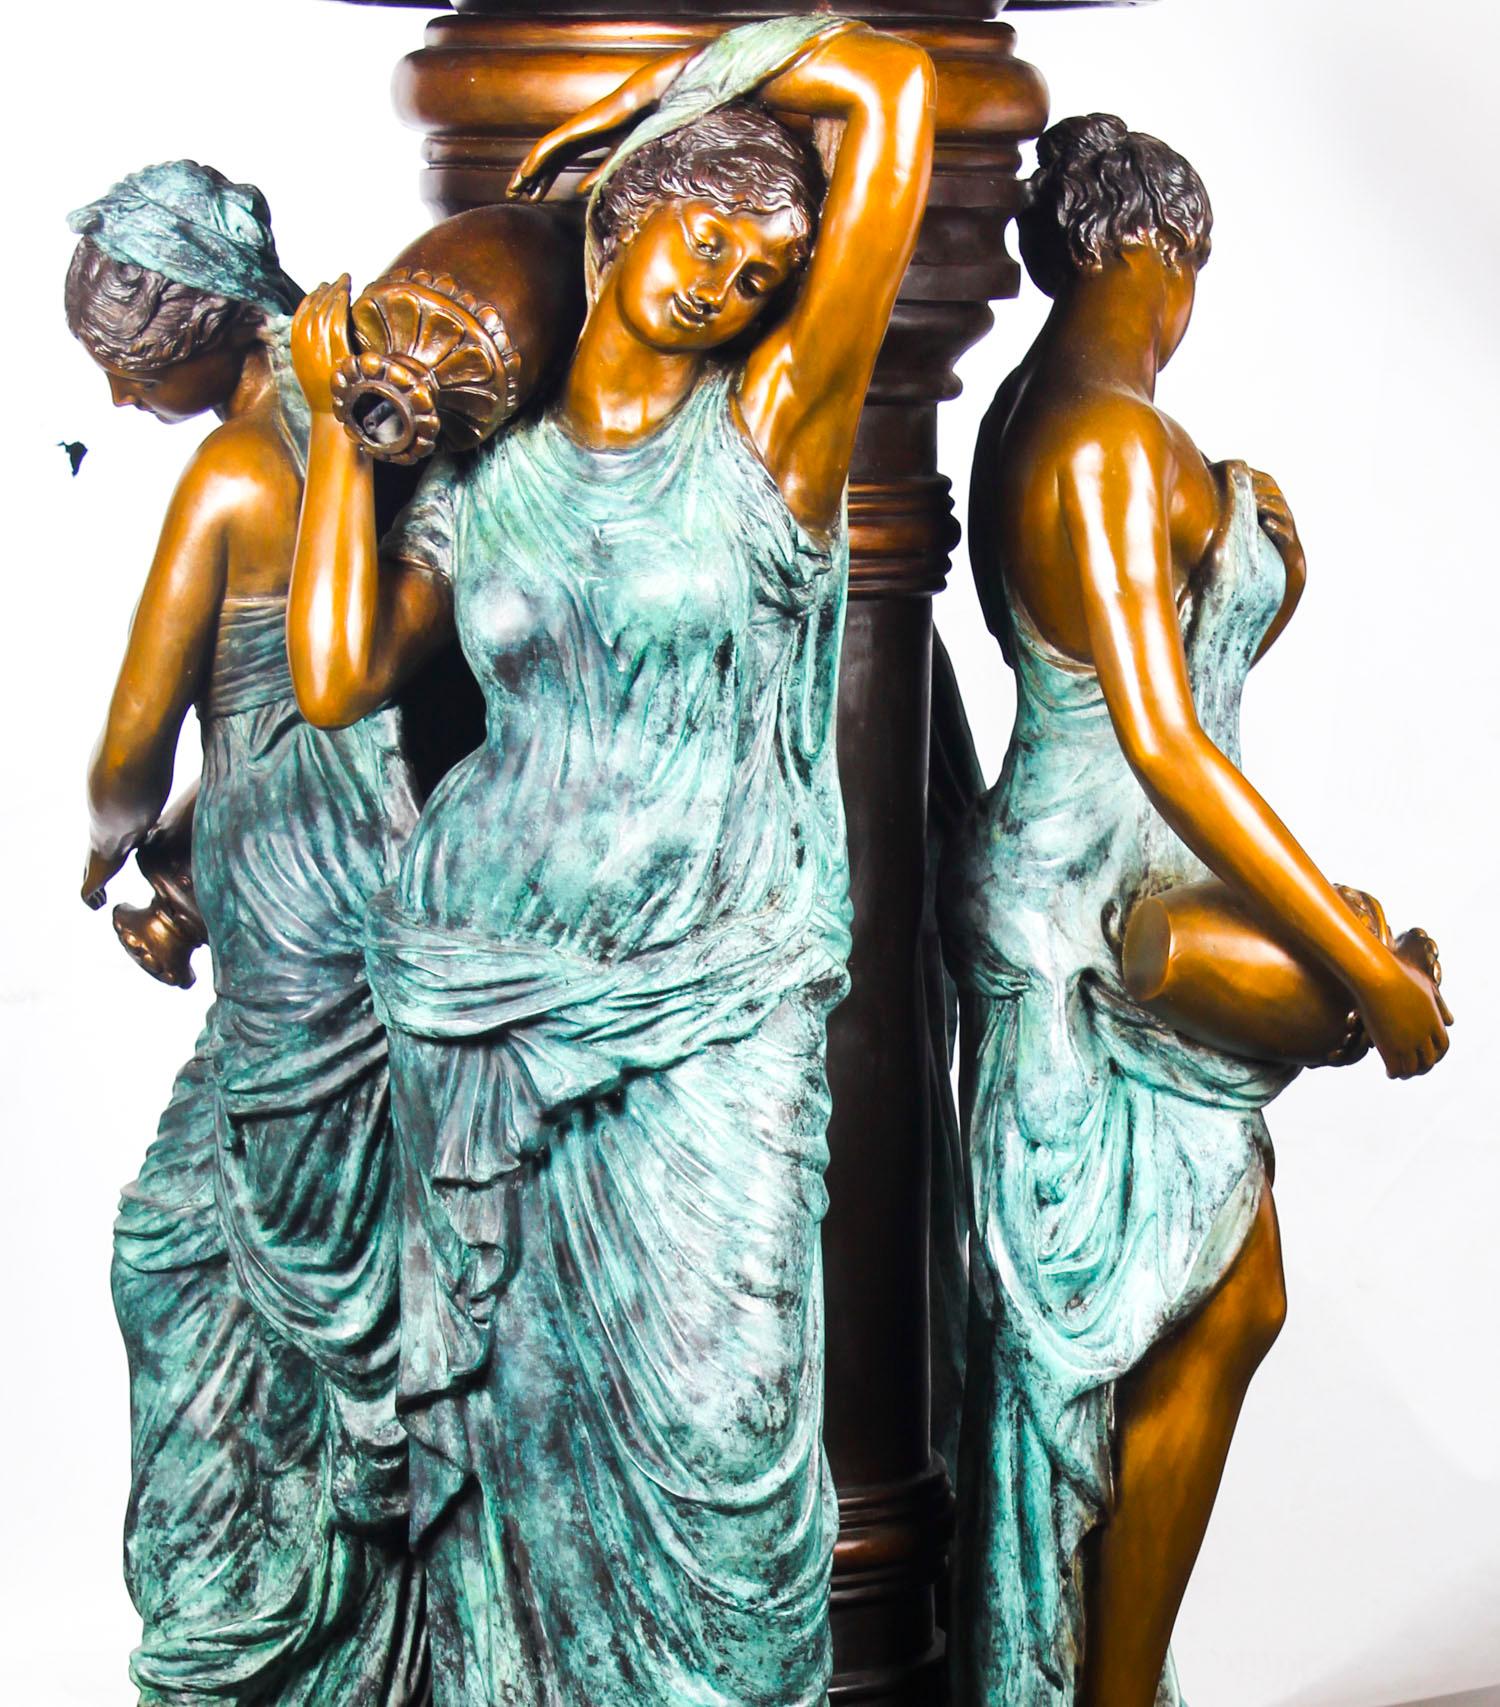 Vintage Monumental Neo-Classical Revival Bronze Sculptural Pond Fountain 20th C For Sale 8